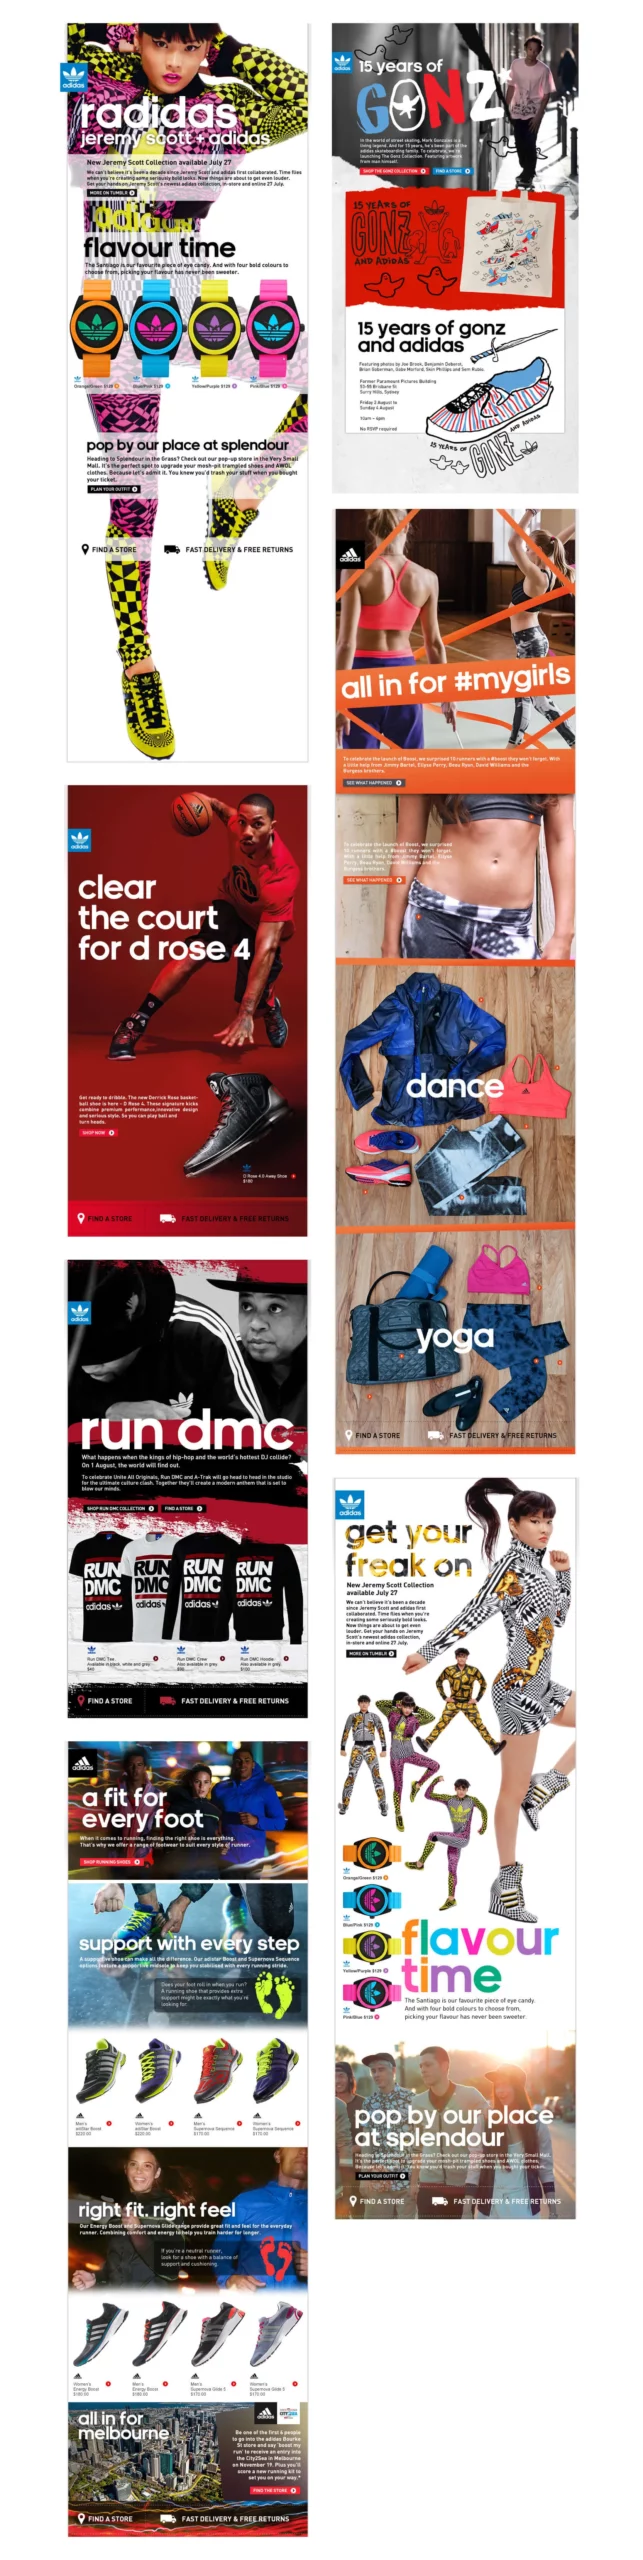 Email marketing and advertising for Adidas featuring Jeremy Scot, Run DMC and Gonz skateboarding